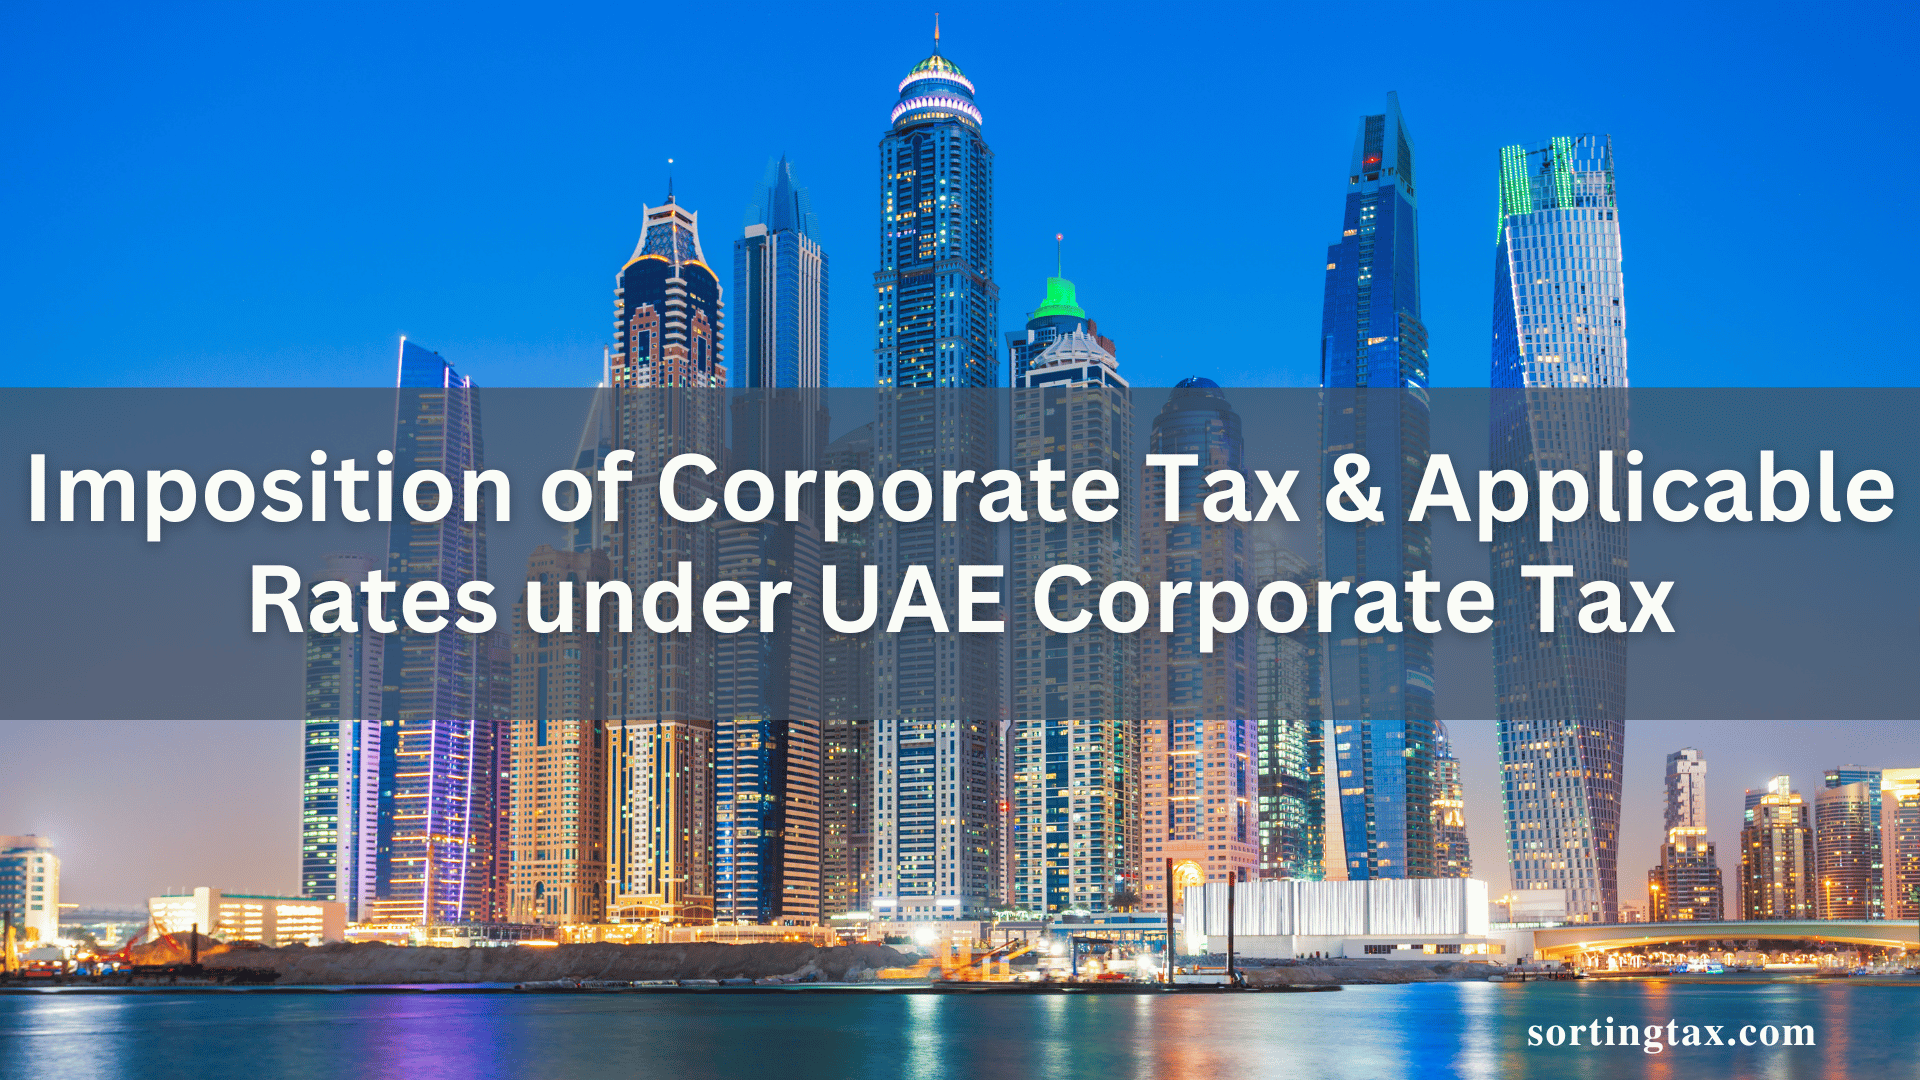 Imposition of Corporate Tax & Applicable Rates under UAE Corporate Tax